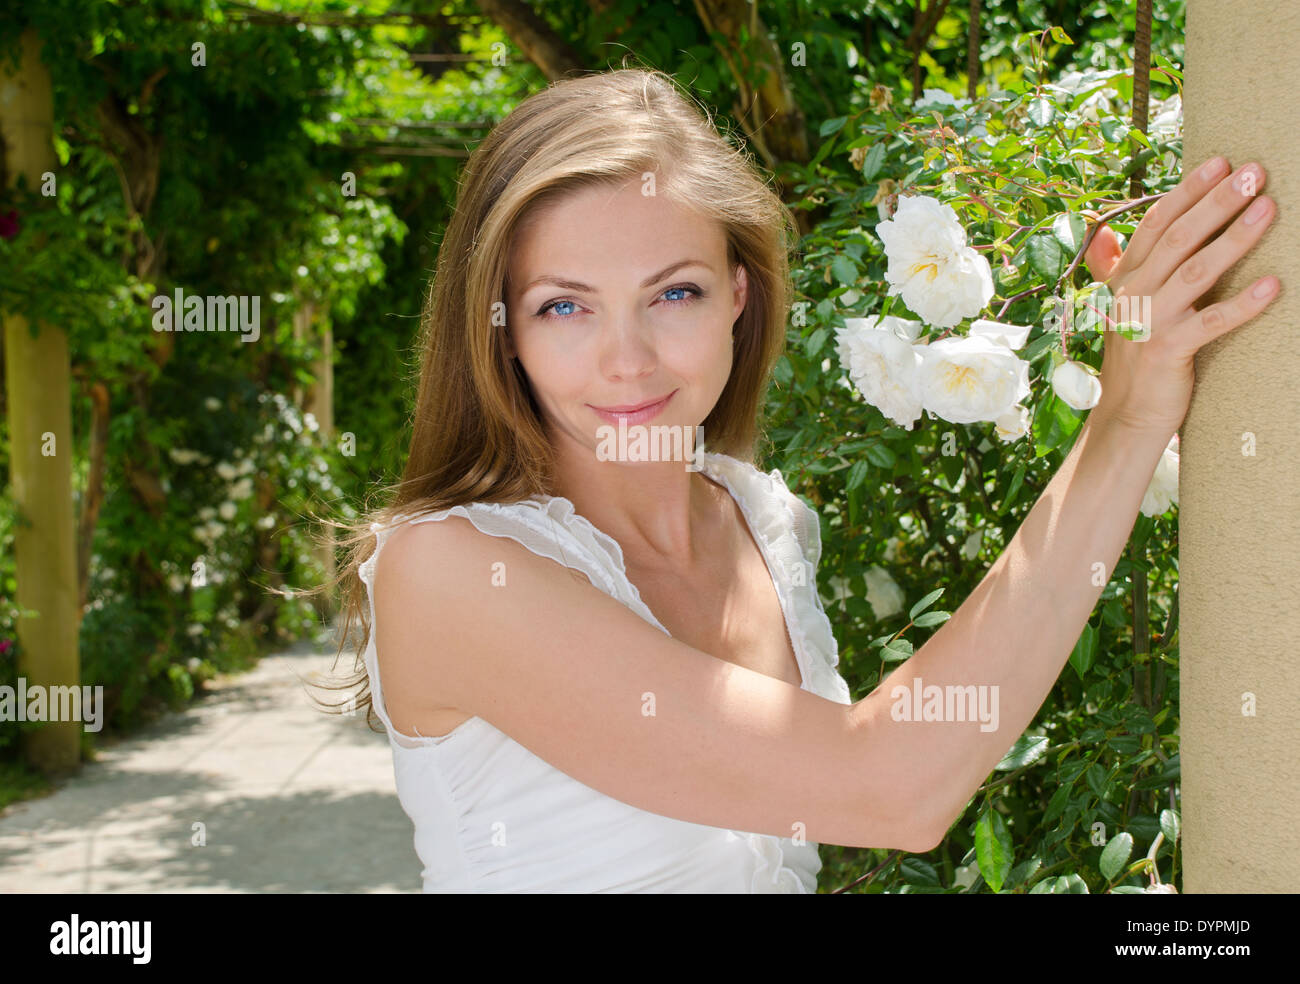 happy woman with blond hair and blue eyes in the park on a background of flowers Stock Photo